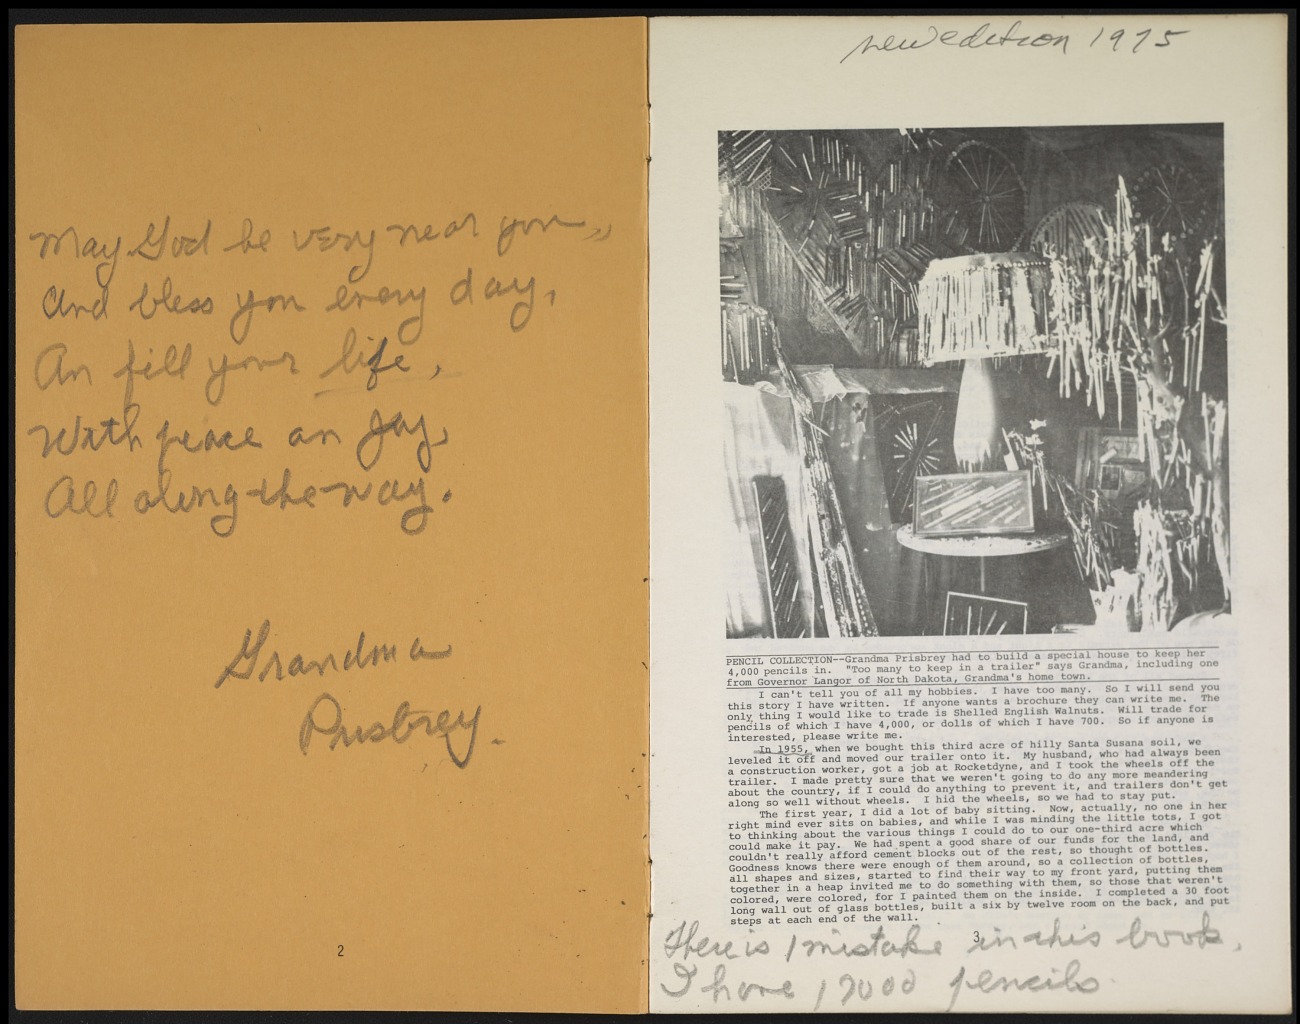 Interior of a brochure featuring a black-and-white photograph and printed text on the right-hand page, under which is penciled "There is a mistake in this book / I have 1200 pencils." On the left hand page is penciled a poem: "May God be very near you / And bless you every day / and fill your life / with peace and joy / all along the way / Grandma / Presbrey."